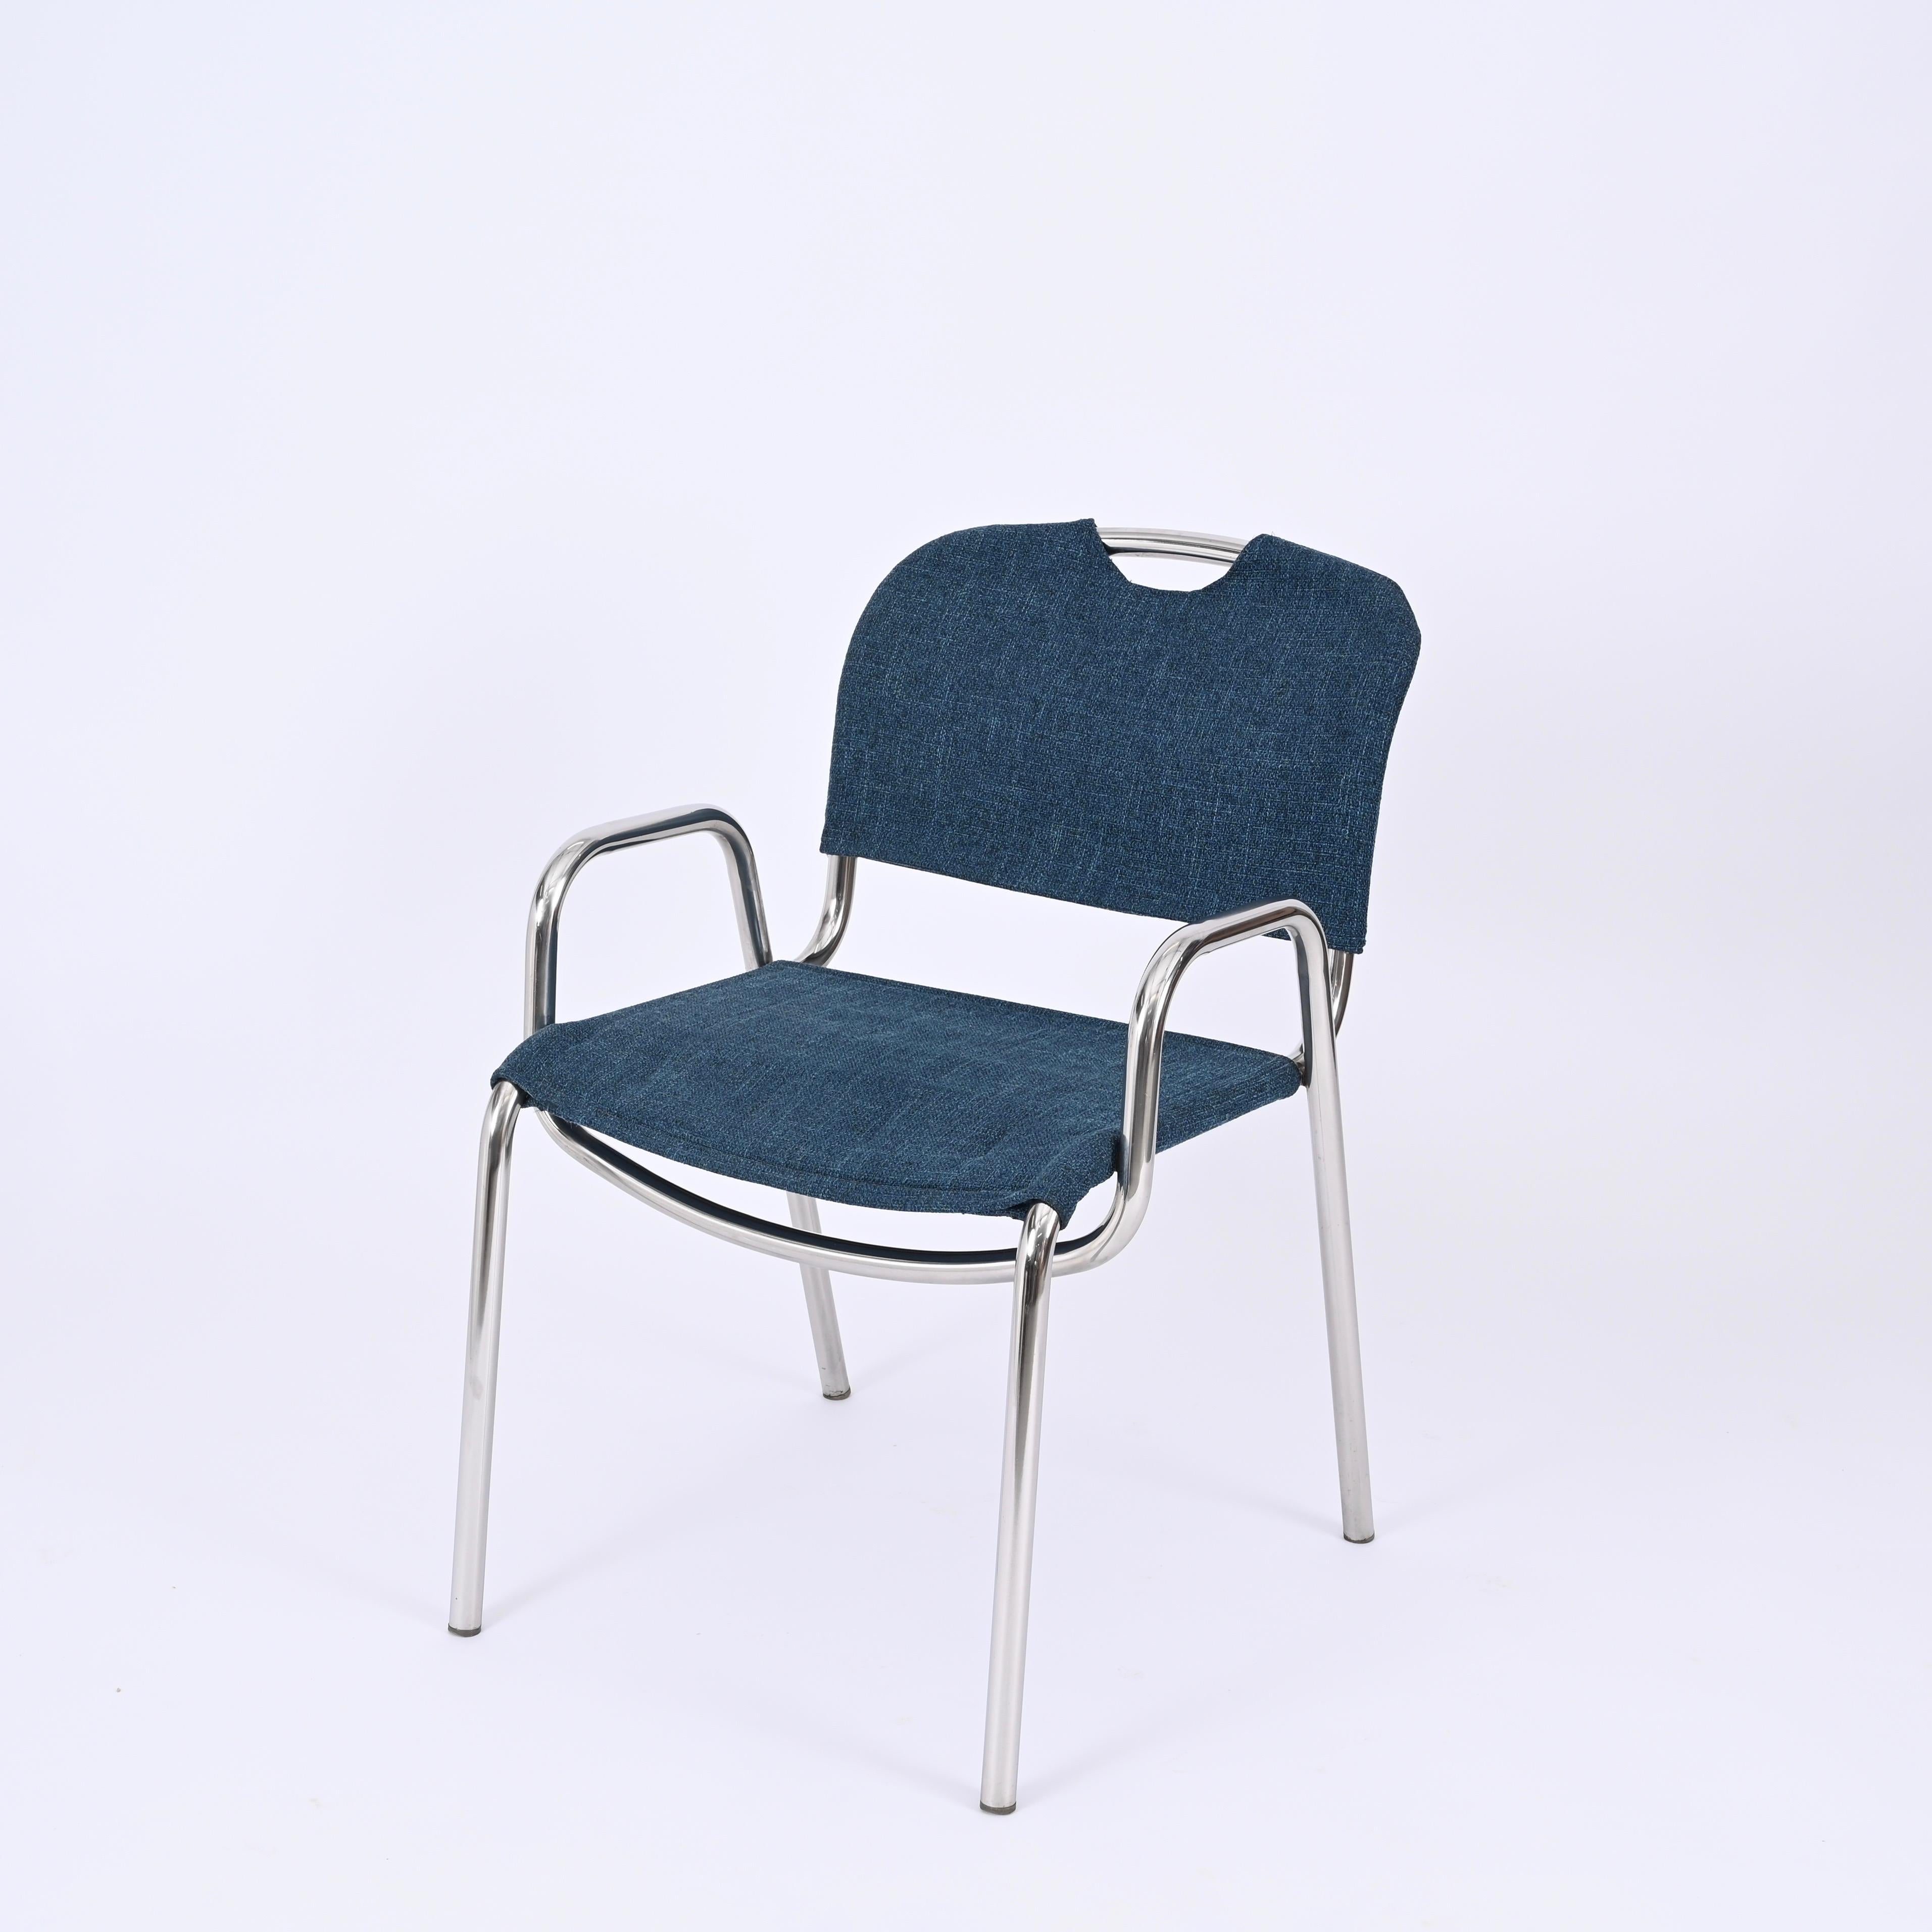 Polished Pair of Blue Castiglietta Dining Chairs by Castiglioni for Zanotta, Italy 1960s For Sale